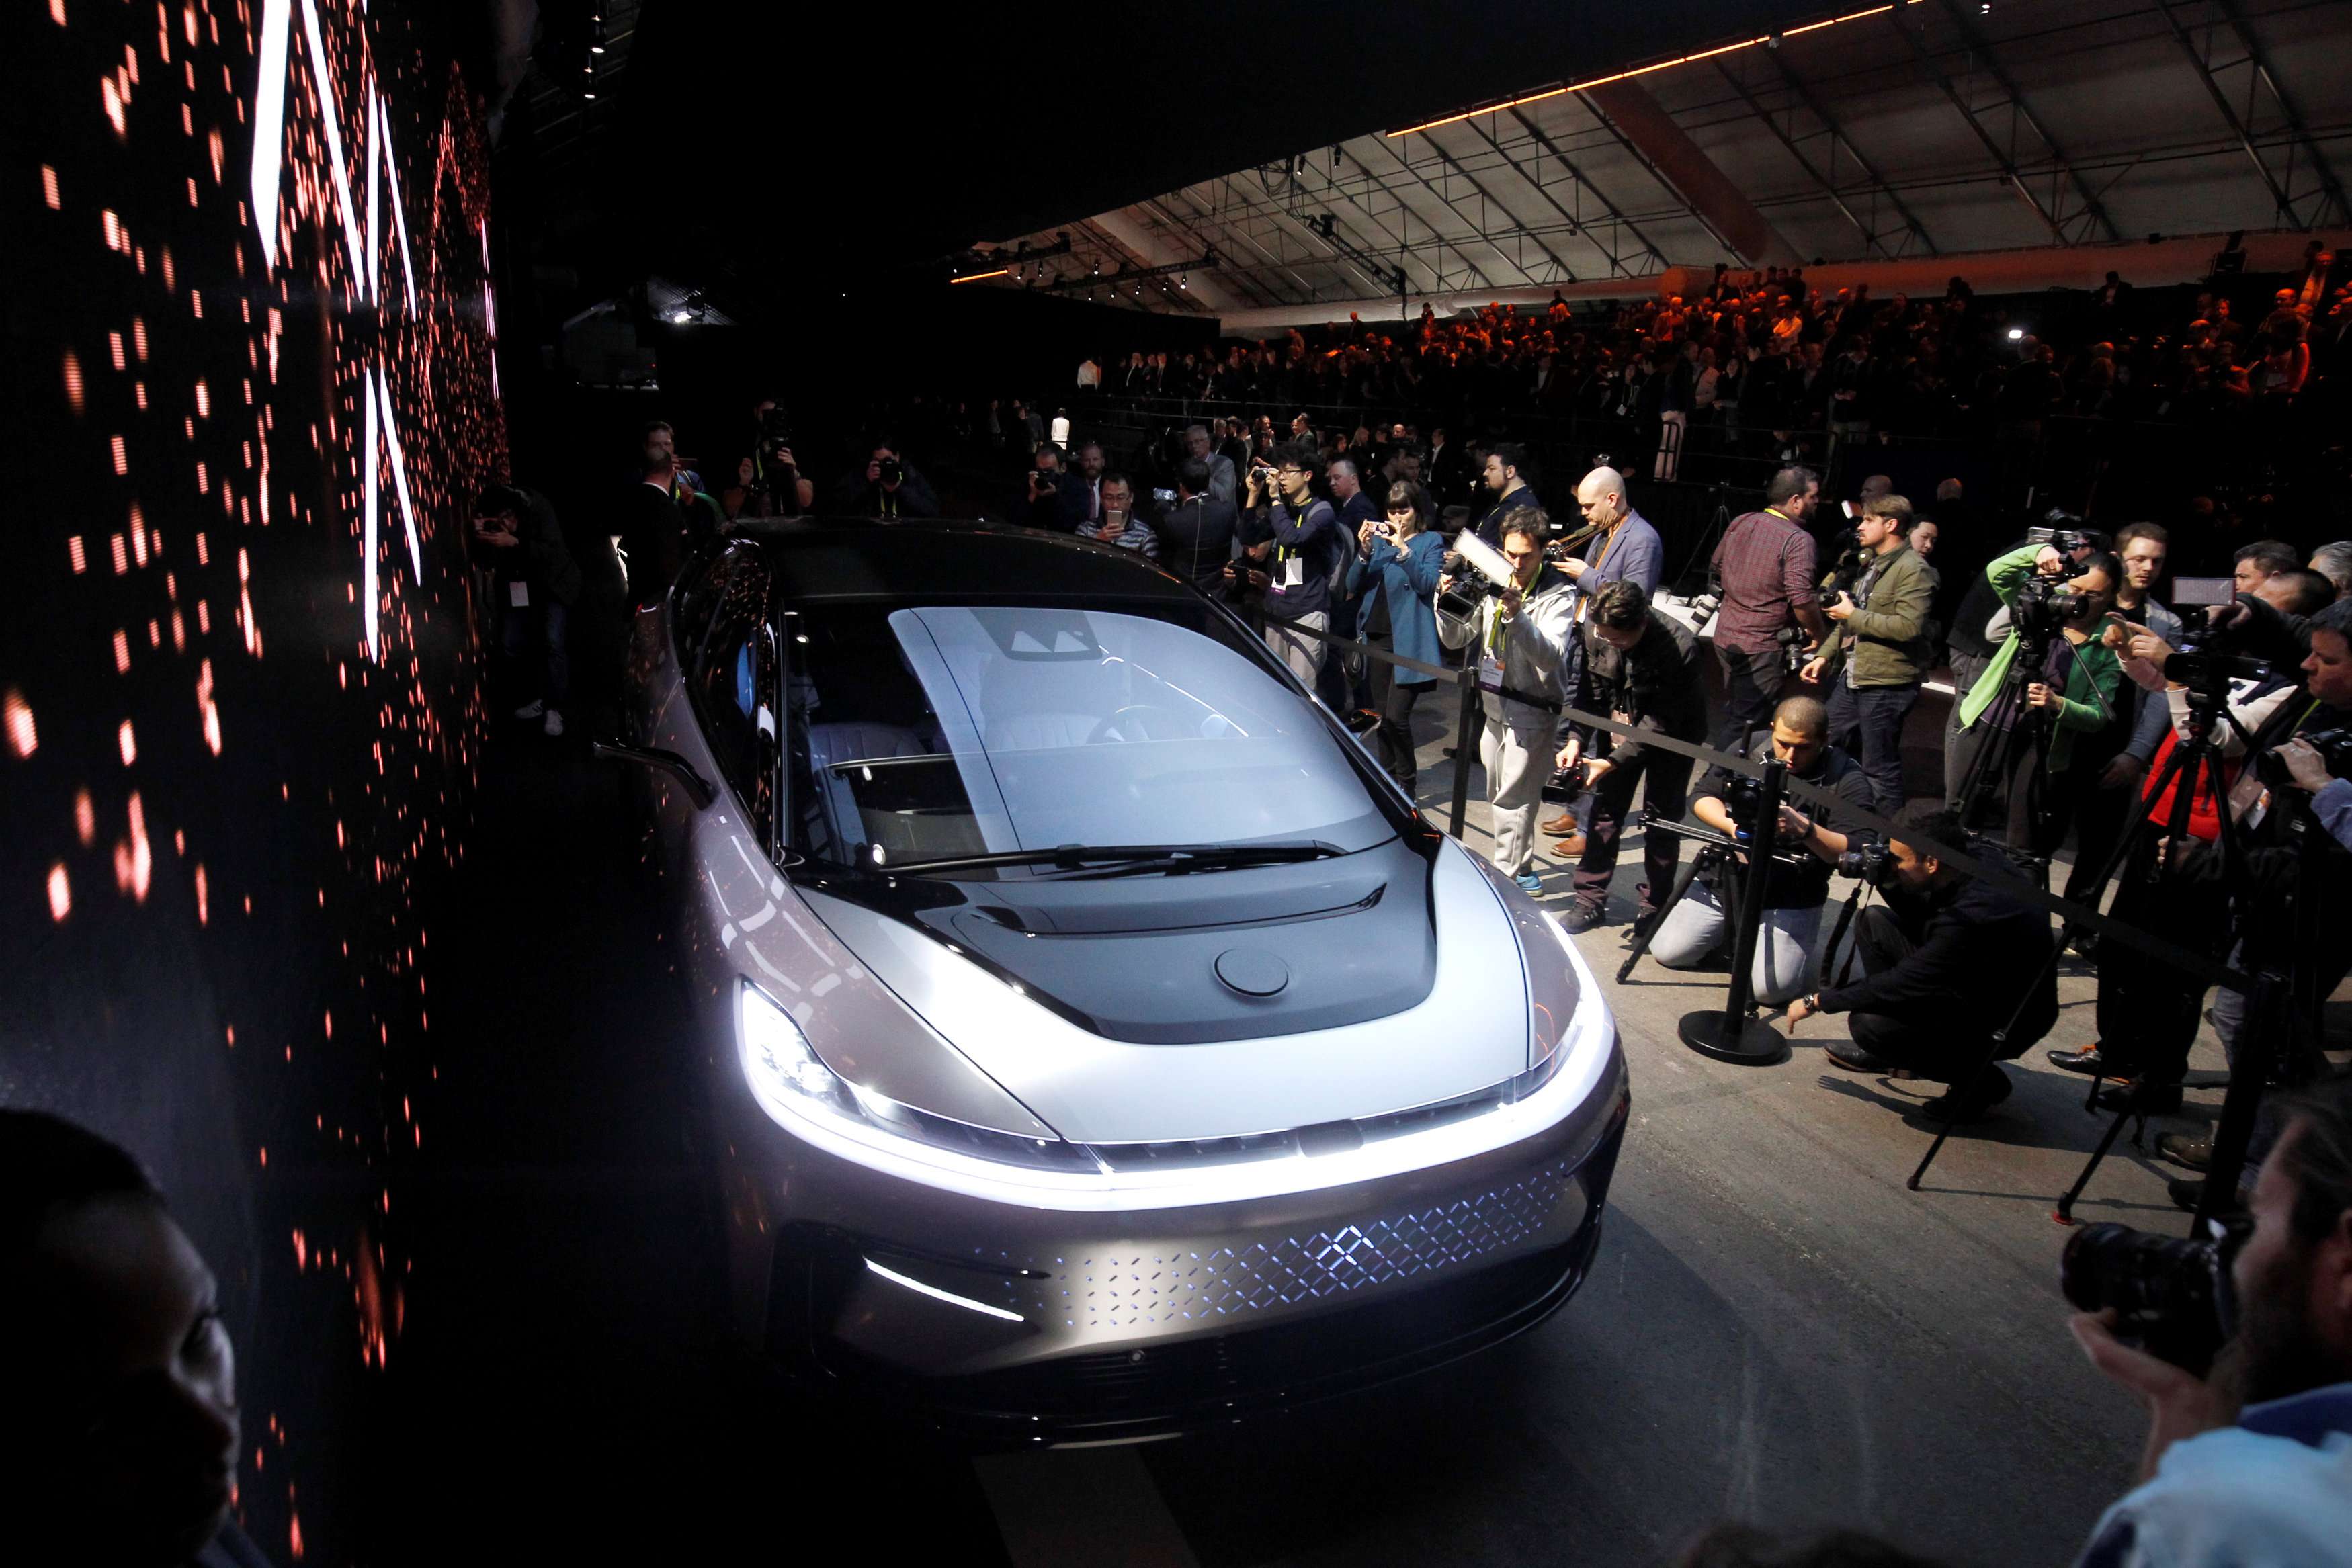 Faraday Future’s FF 91 electric car during an unveiling event at CES in Las Vegas, on January 3, 2017. Photo: Reuters